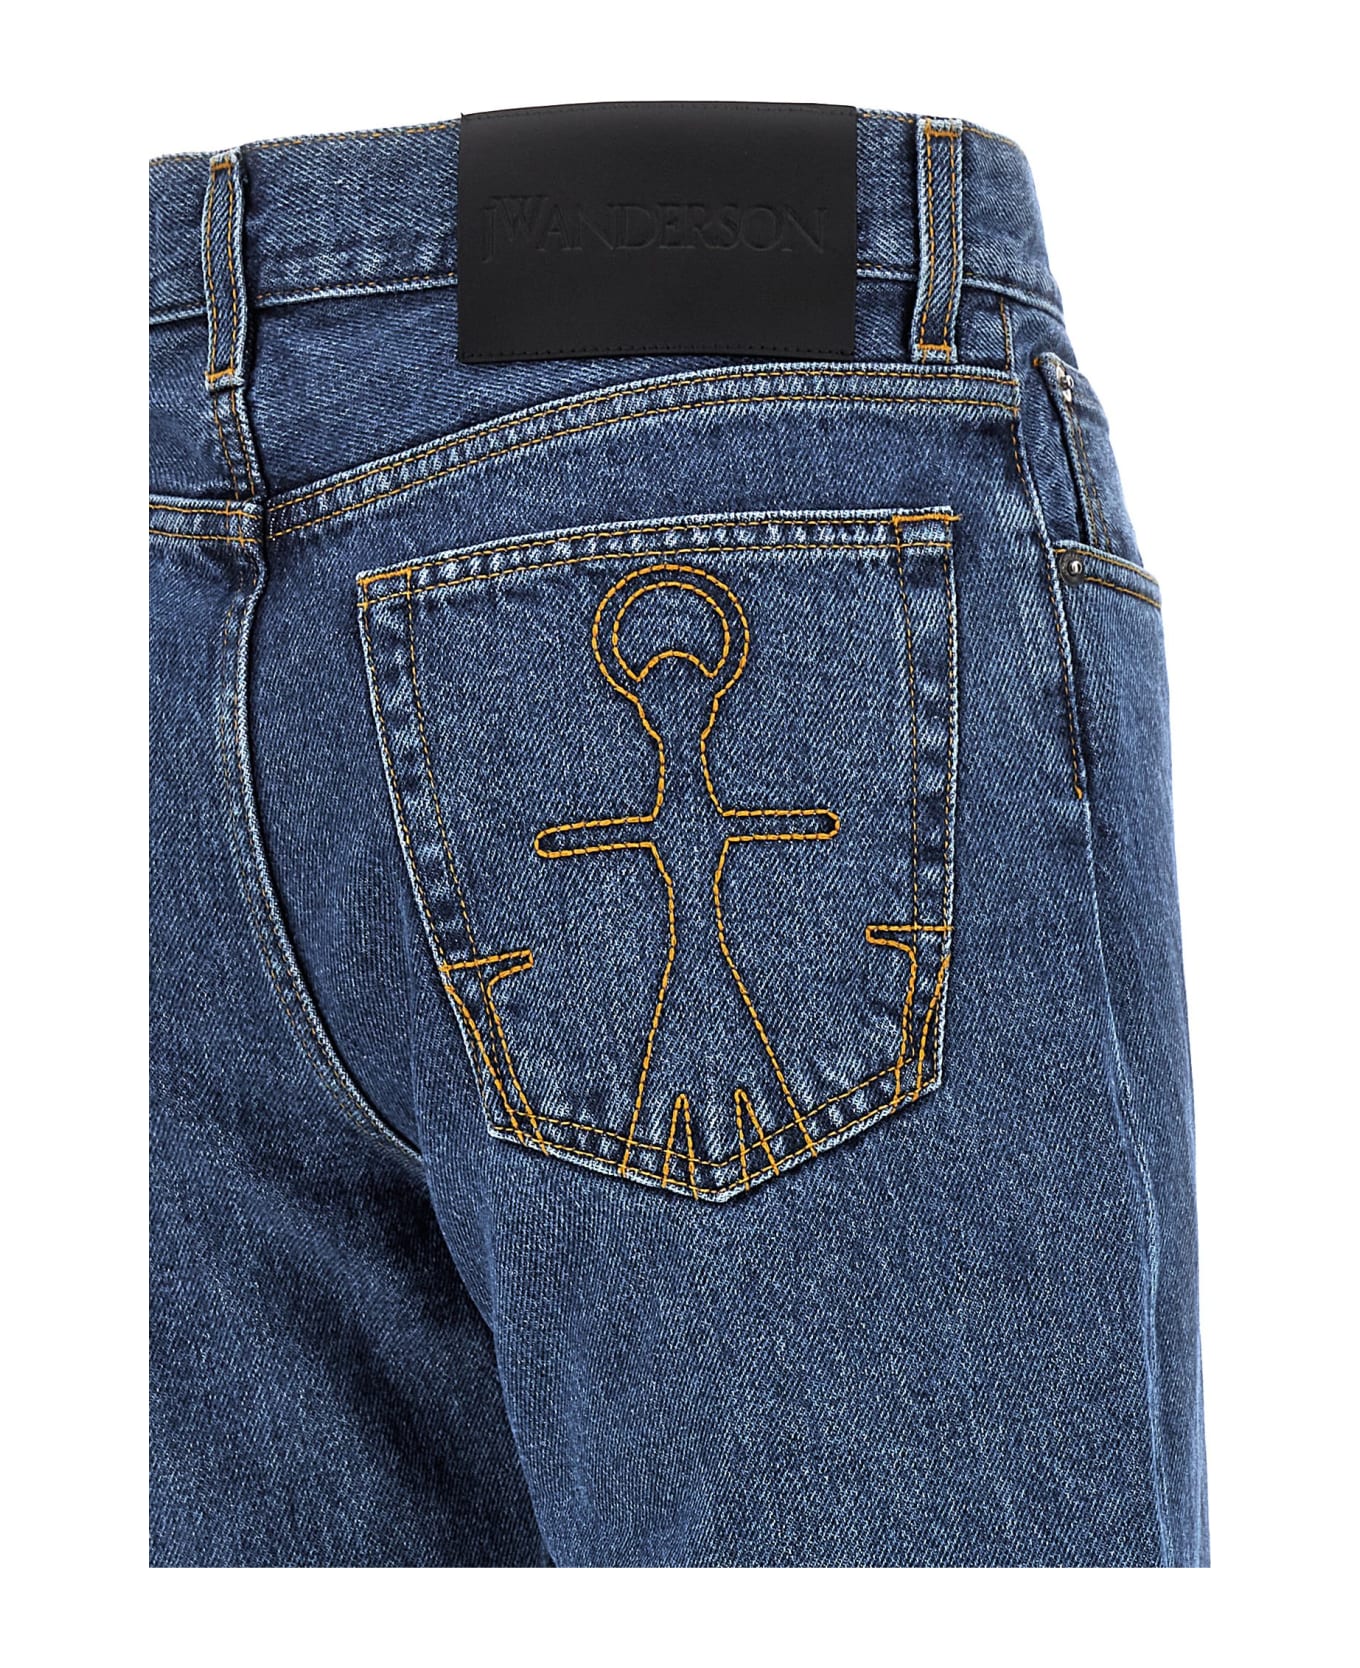 J.W. Anderson 'anchor' Jeans - Blue